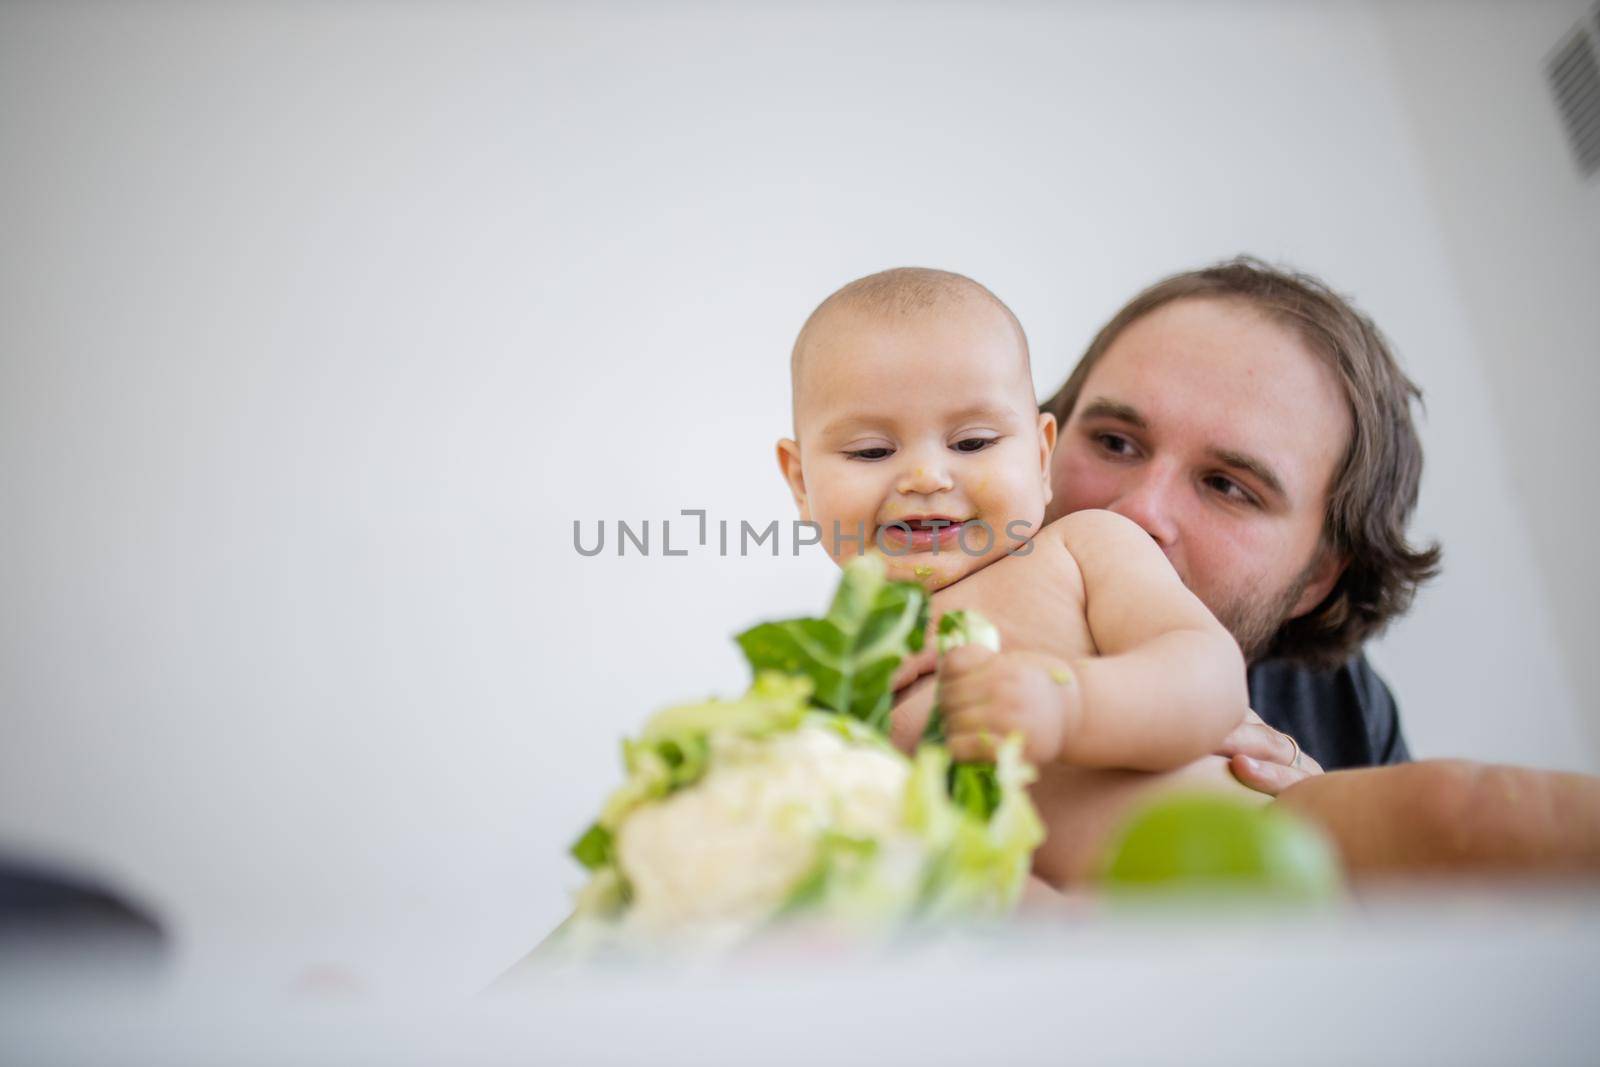 Father lovingly holding and kissing his happy baby daughter above table. Adorable baby smiling and playing with cauliflower. Babies interacting with food